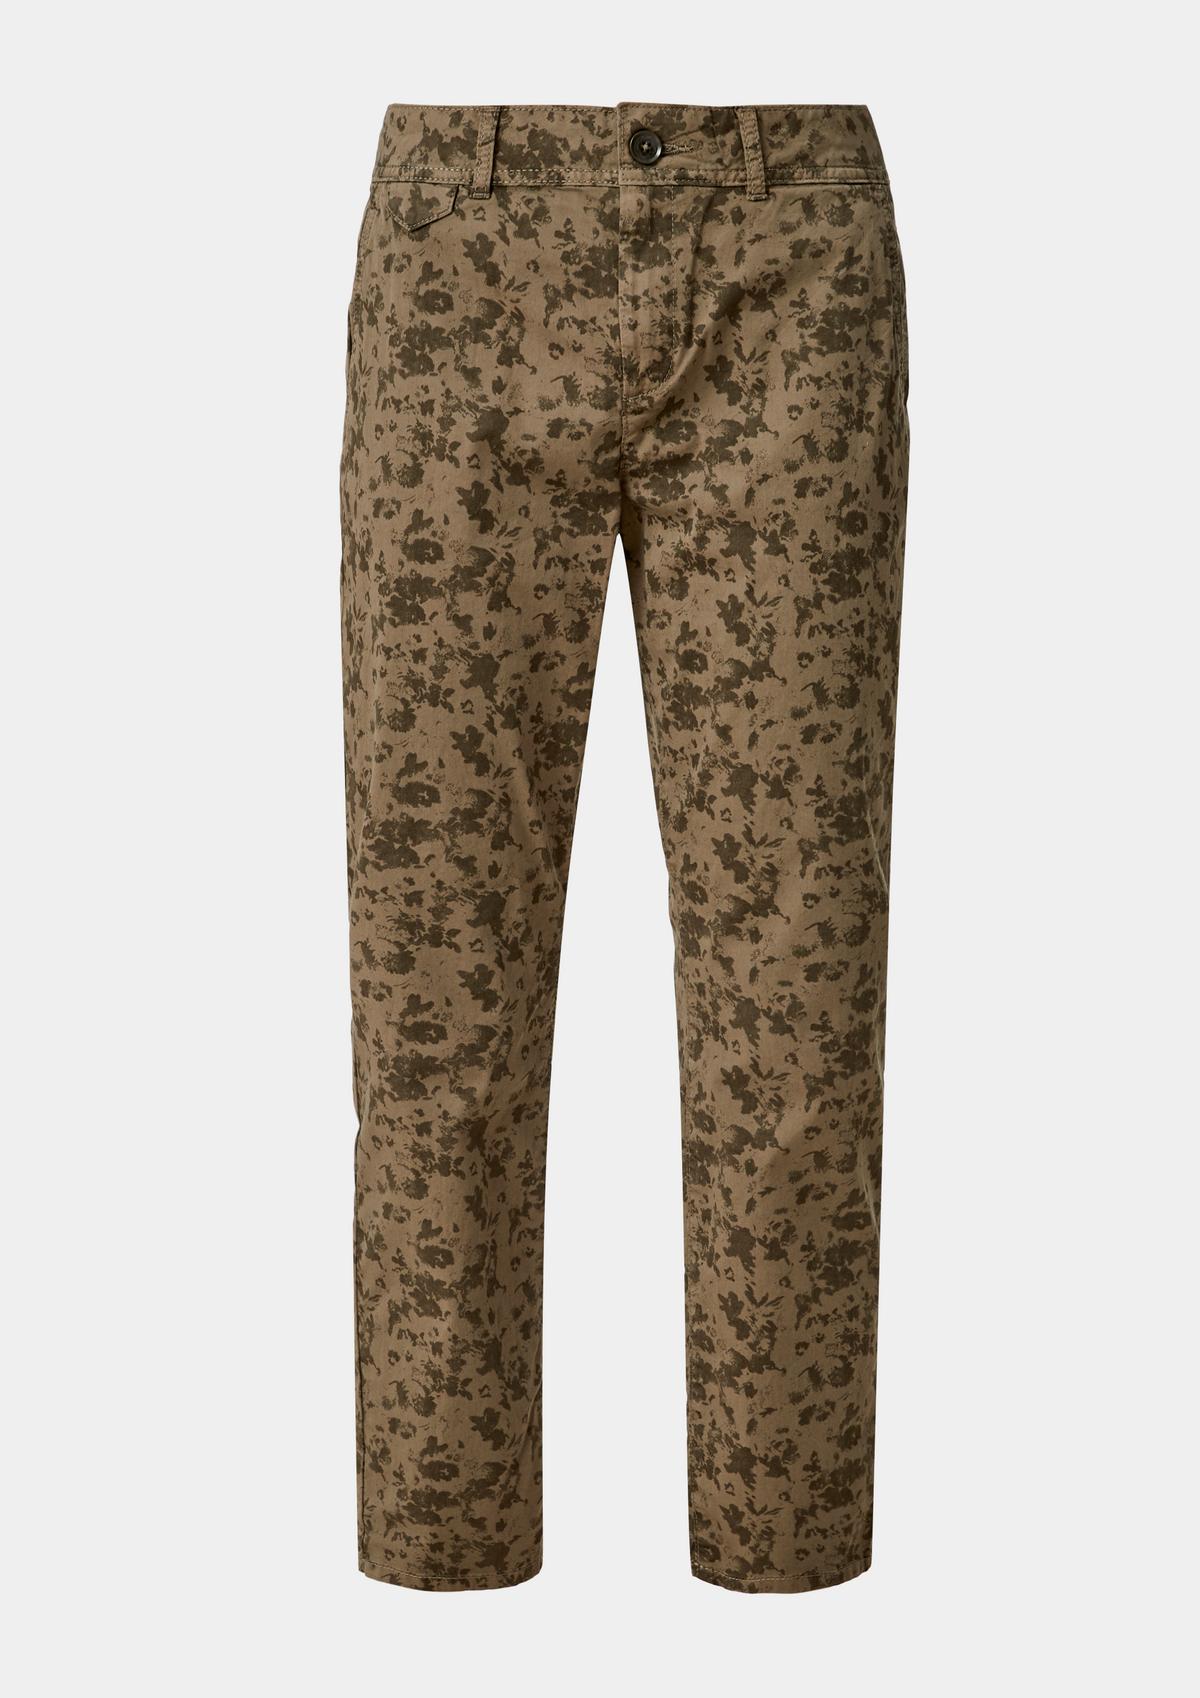 s.Oliver Comfort chinos: trousers with a printed pattern